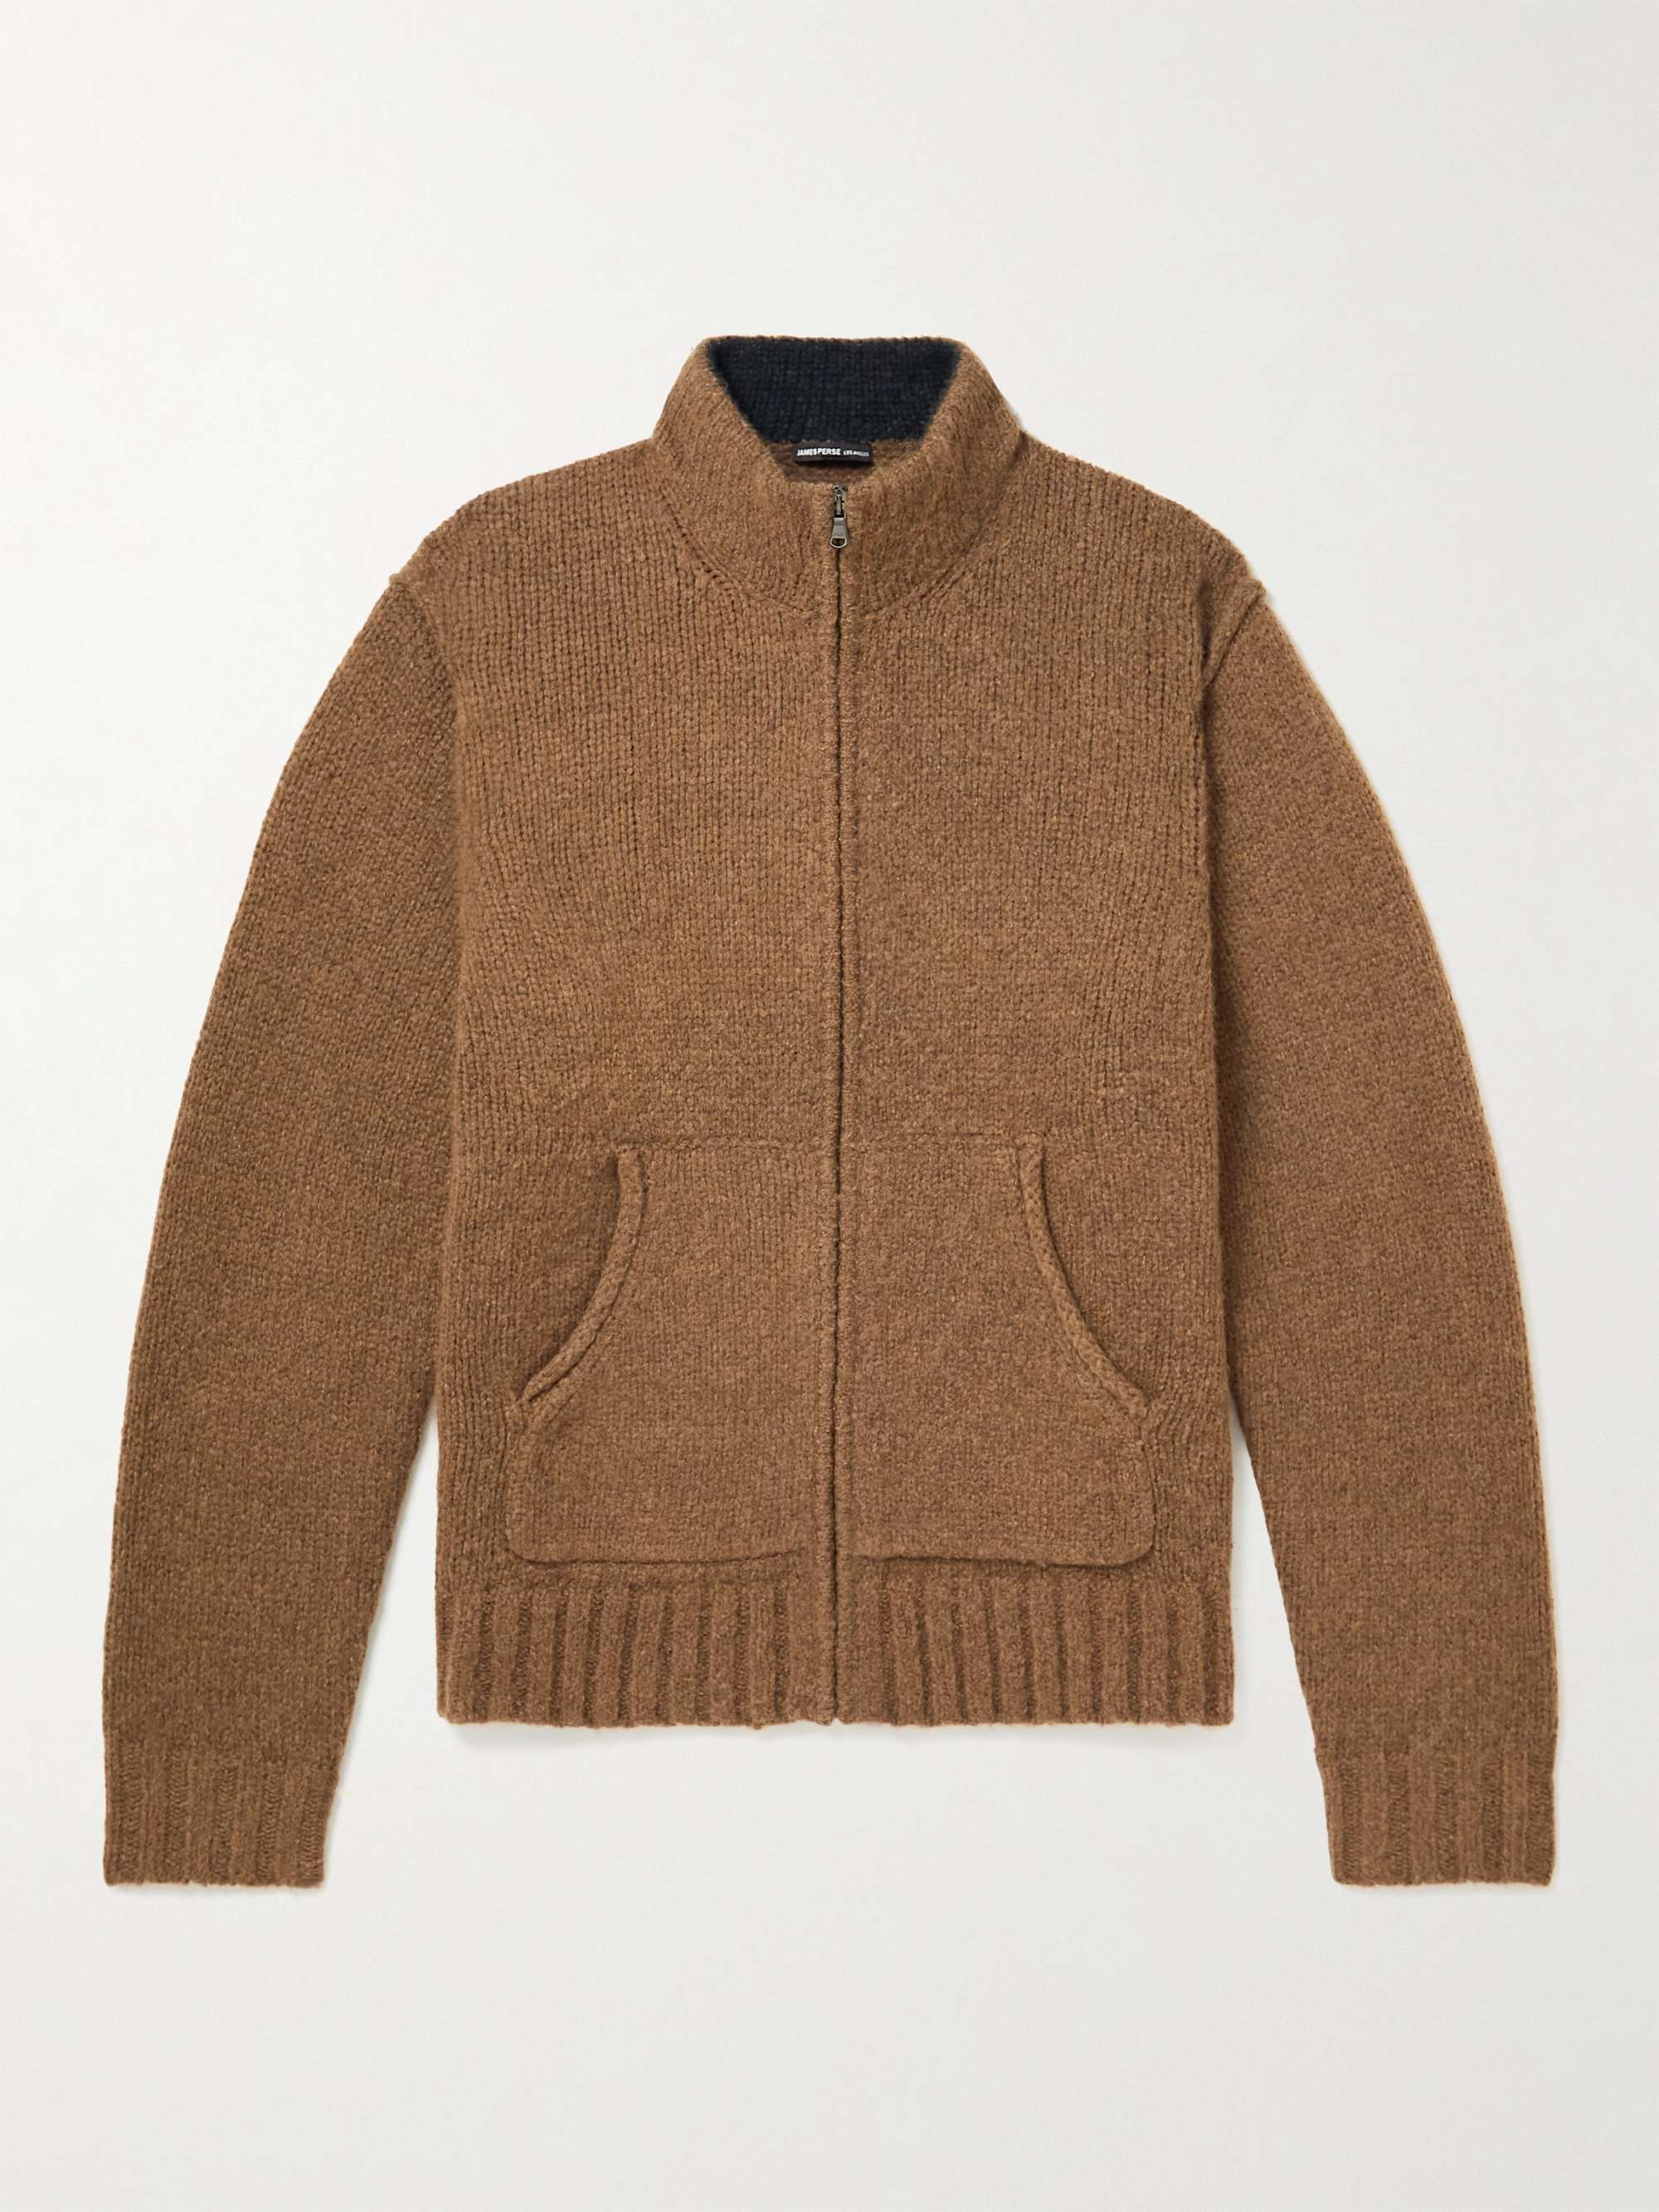 JAMES PERSE Knitted Zip-Up Cardigan for Men | MR PORTER